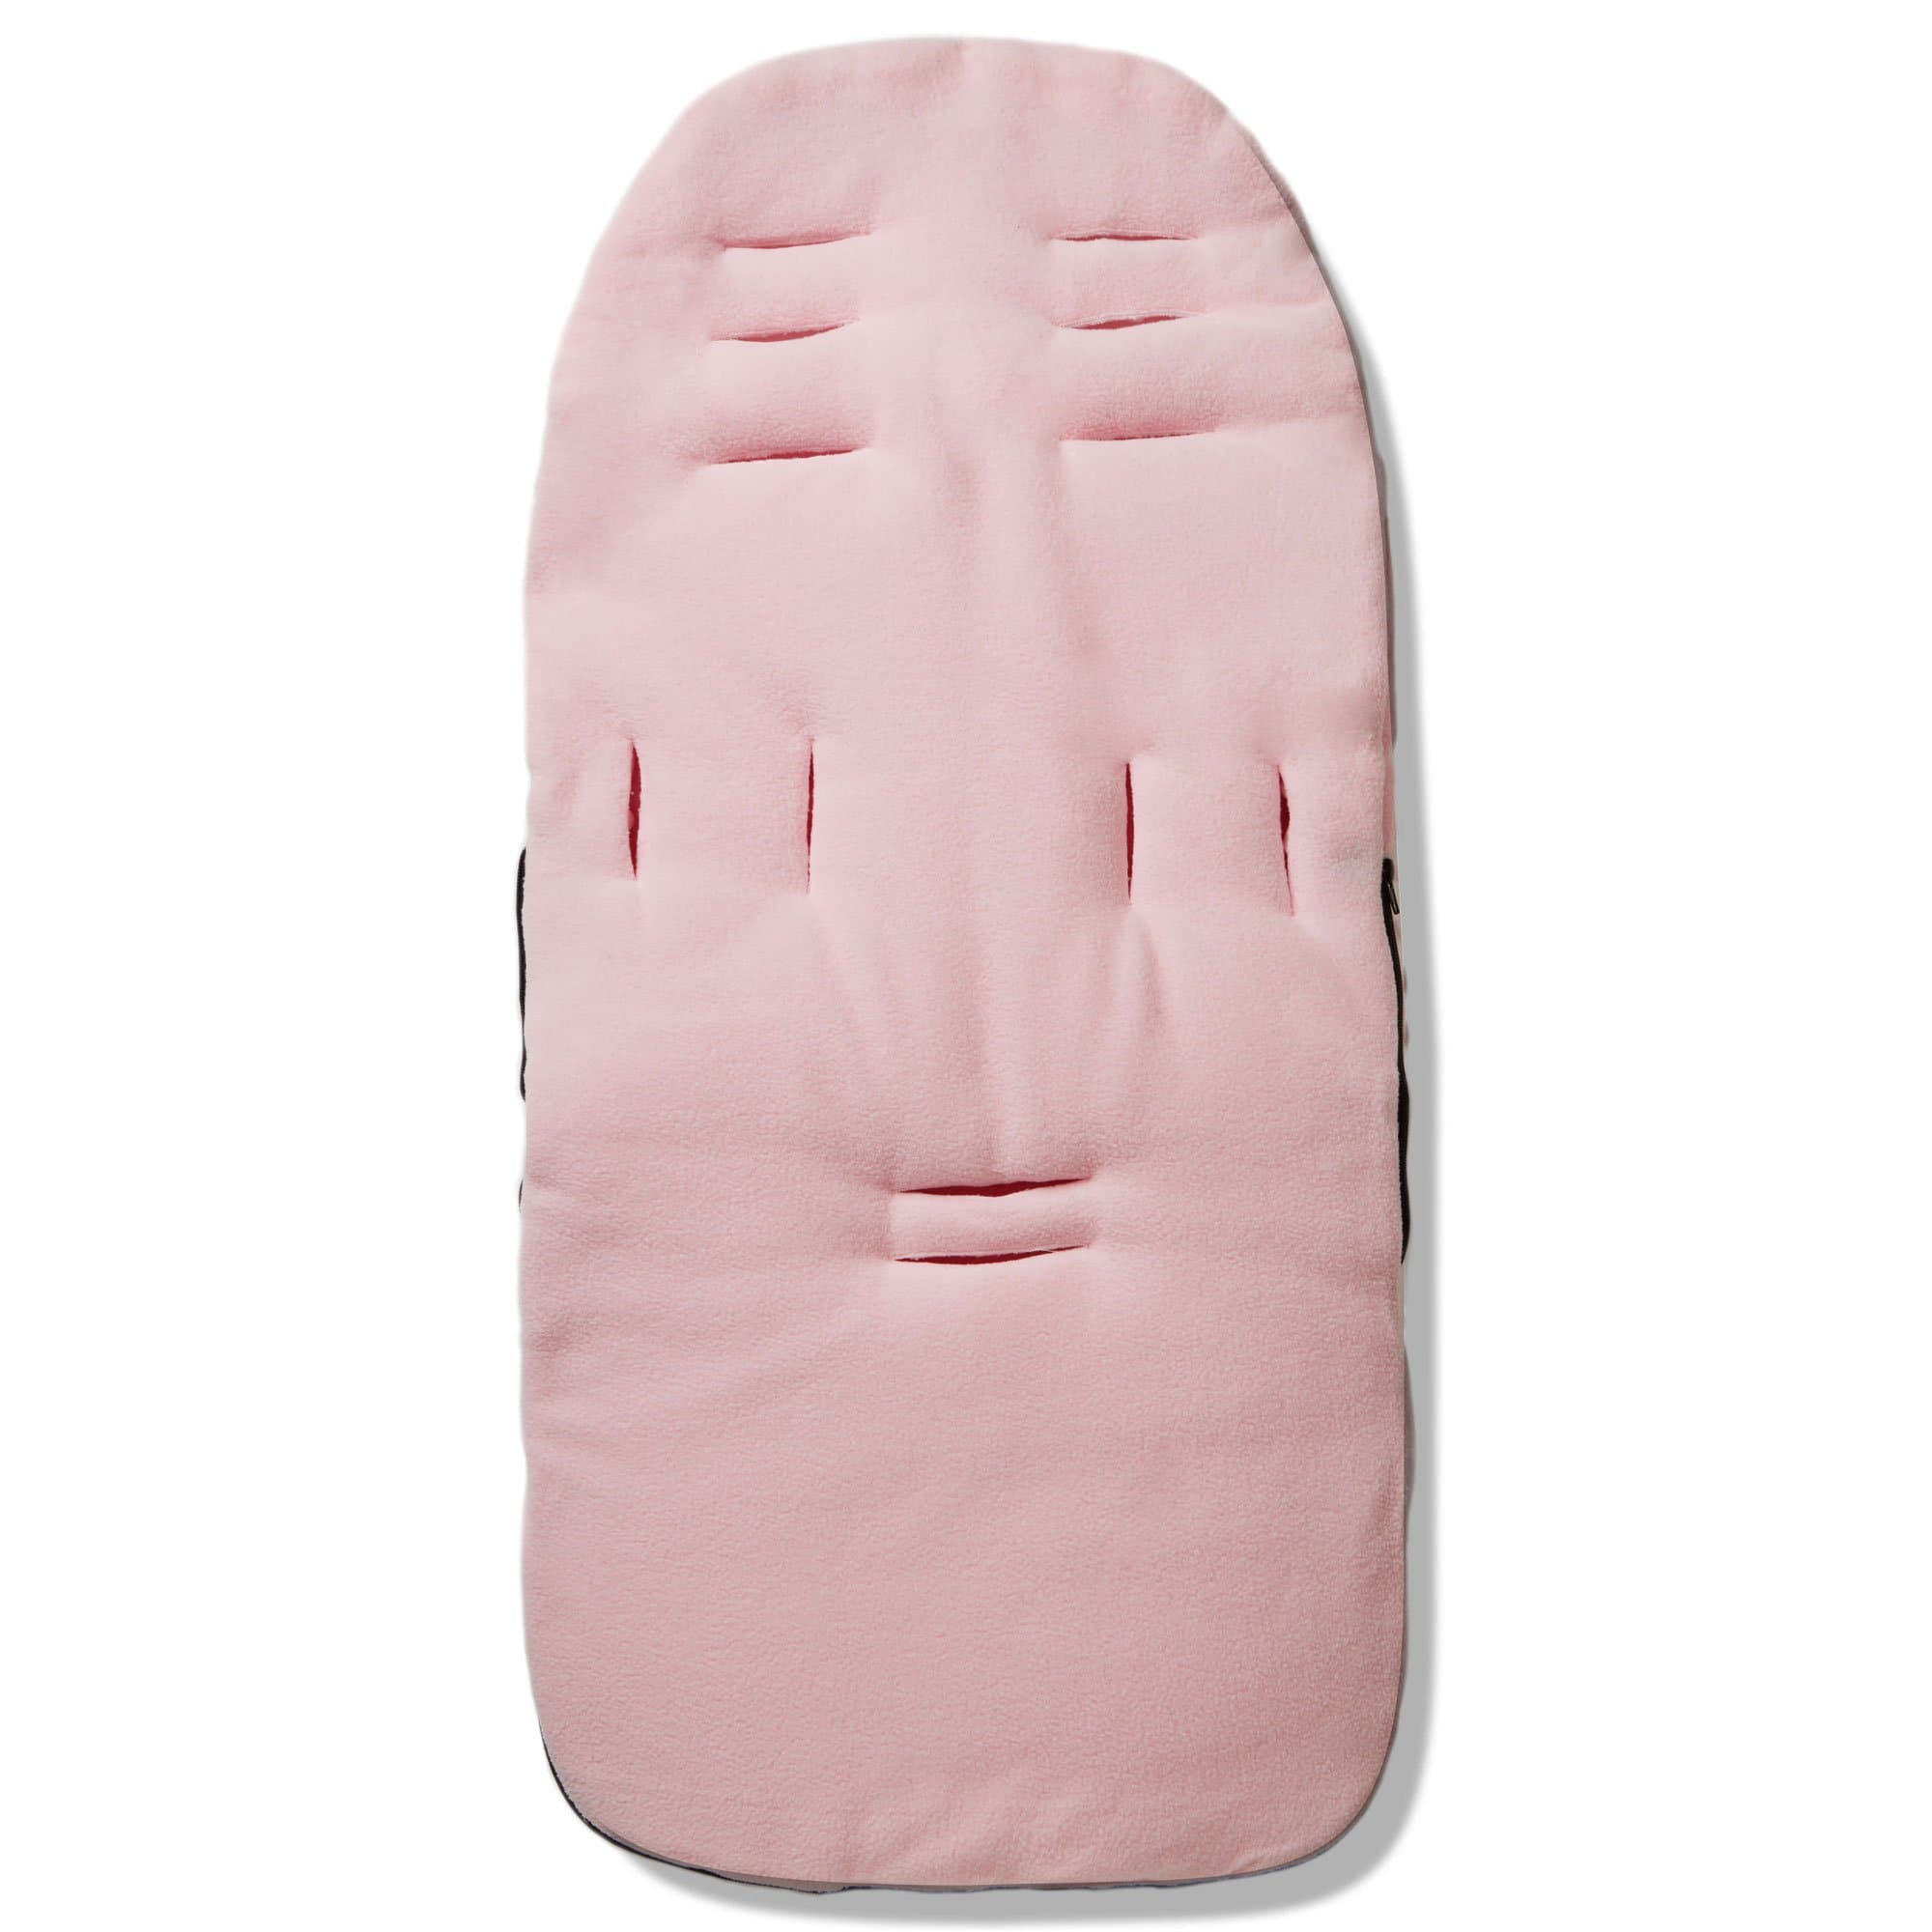 Dimple Footmuff / Cosy Toes Compatible with Babyzen -  | For Your Little One